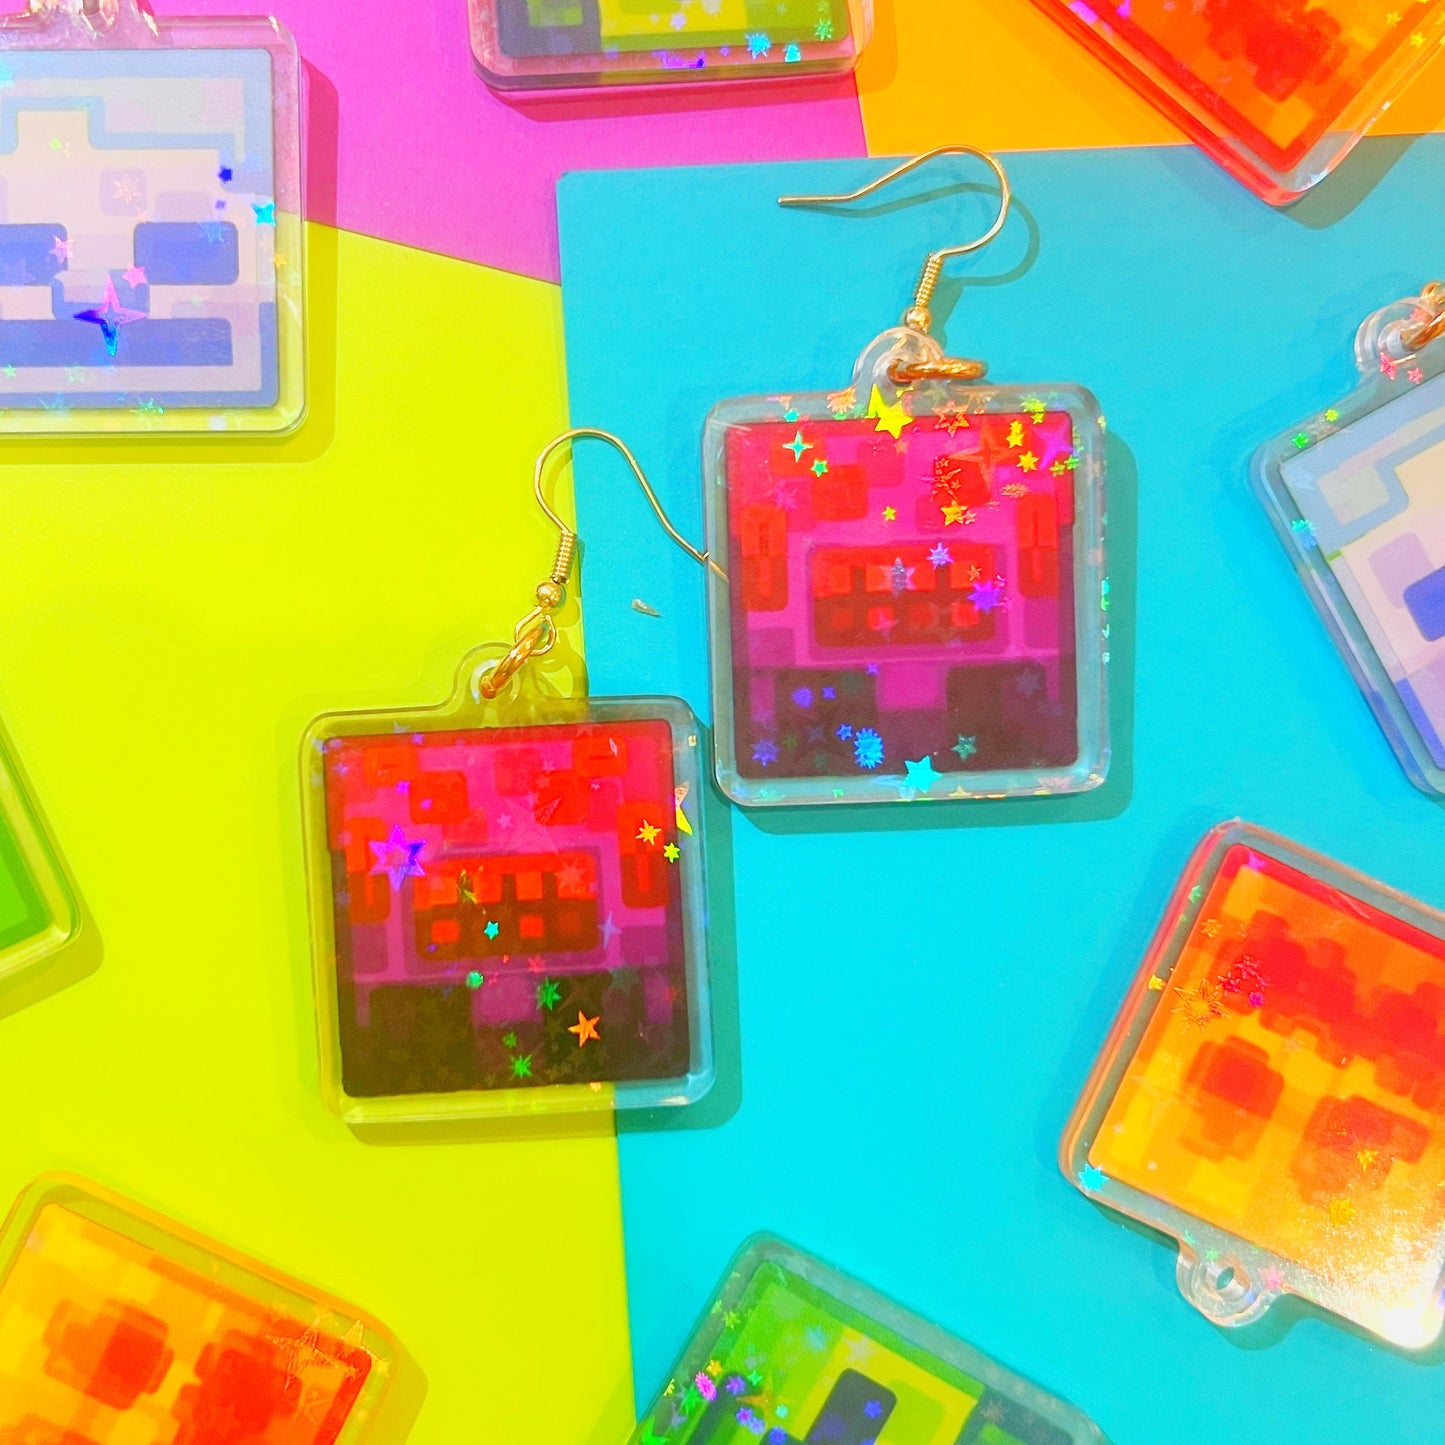 Holographic Mob Spider Earrings Video Game Inspired